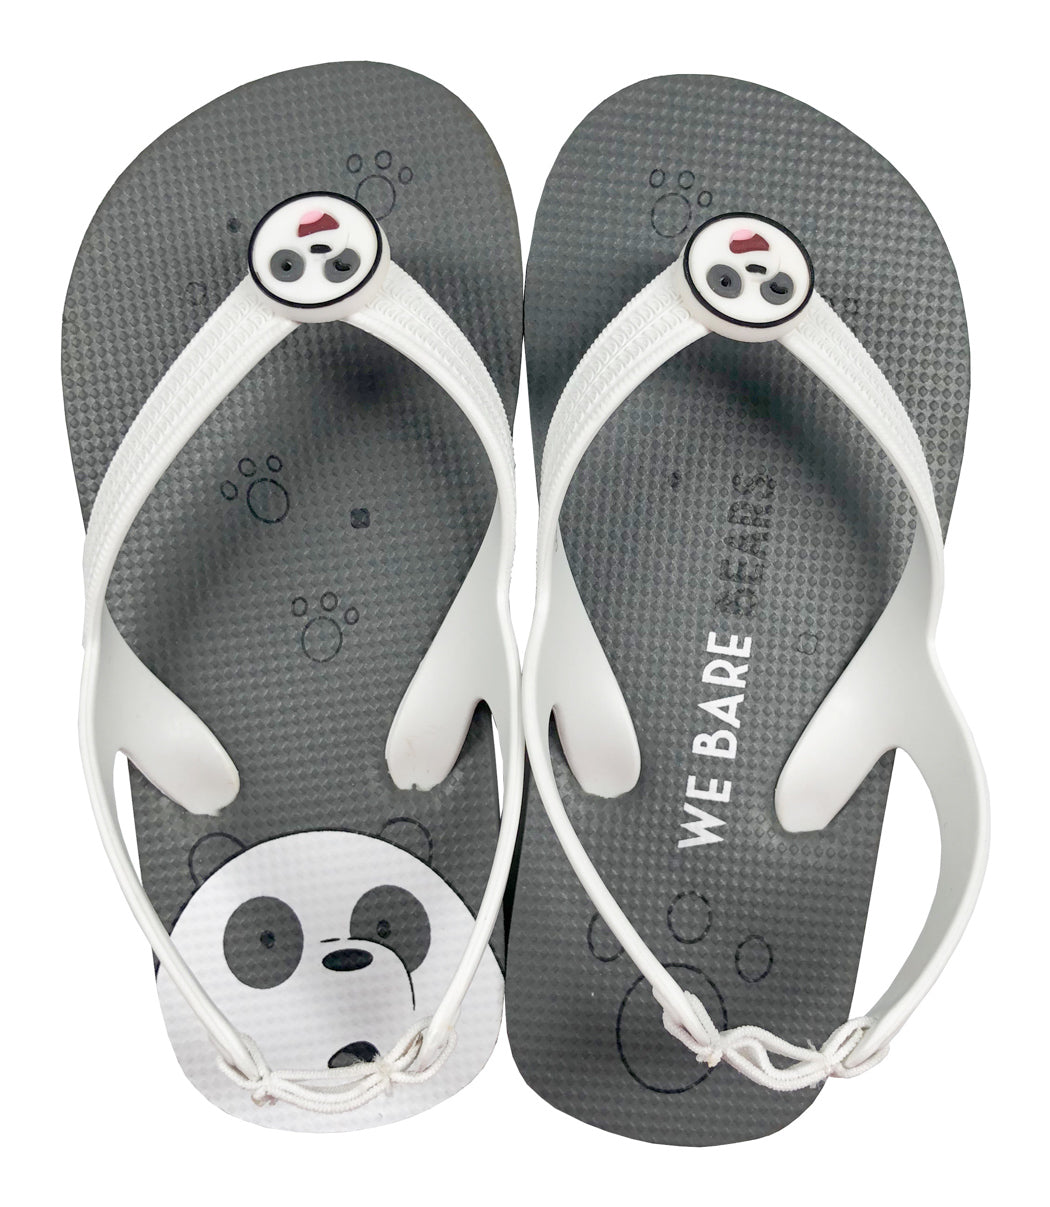 MINISO WE BARE BEARS COLLECTION 5.0 KIDS' SLIPPERS (PANDA,25-26) 2012874316123 KIDS SLIPPERS